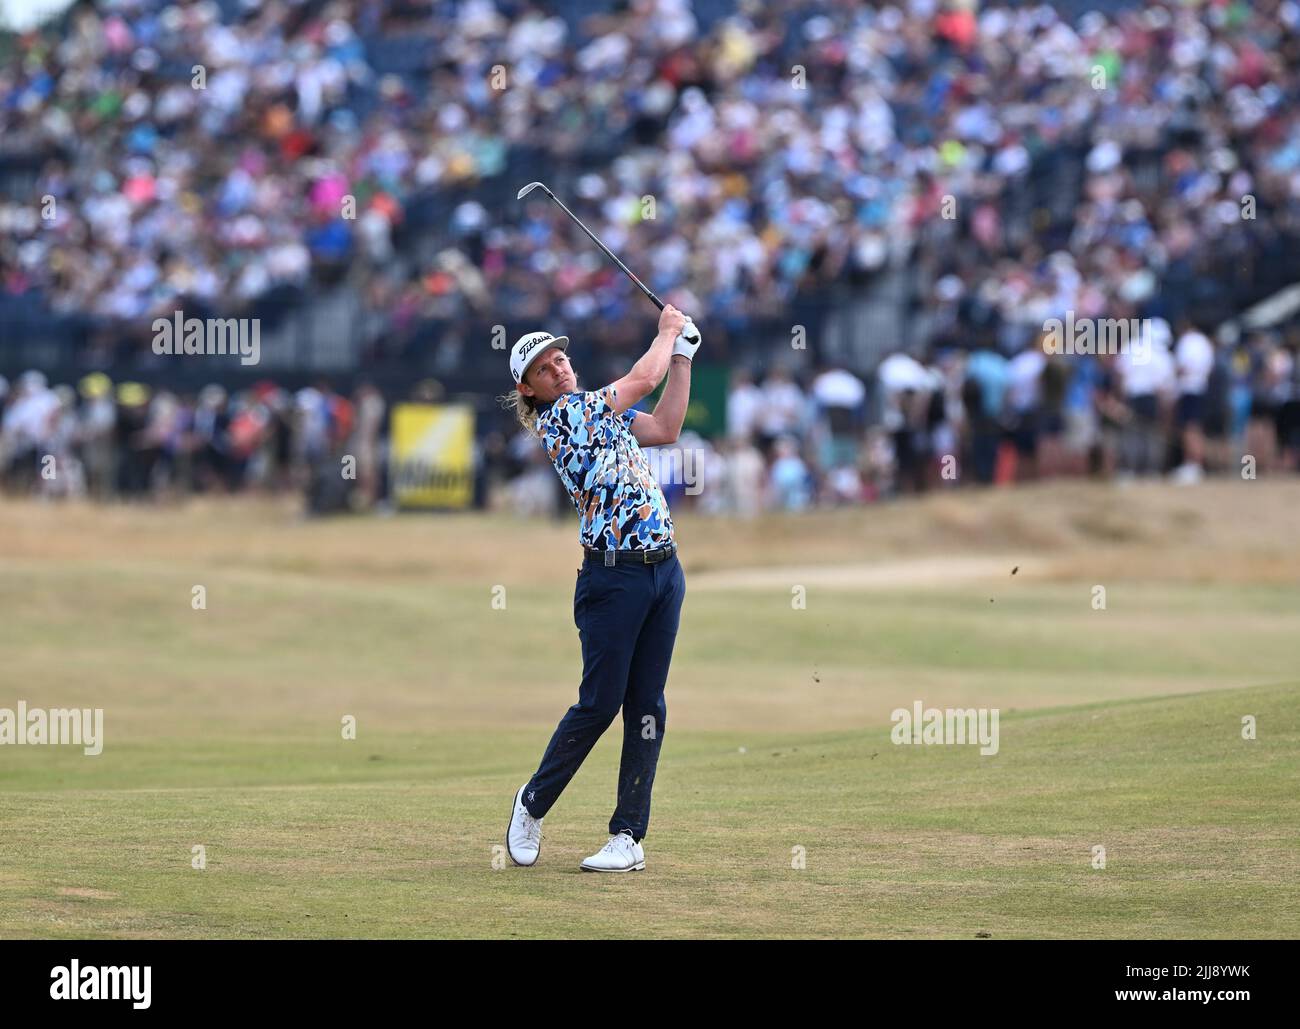 150th Open Golf Championships, St Andrews, July 16th 2022. Cameron Smith plays a shot during the third round at the Old Course, St Andrews. Stock Photo